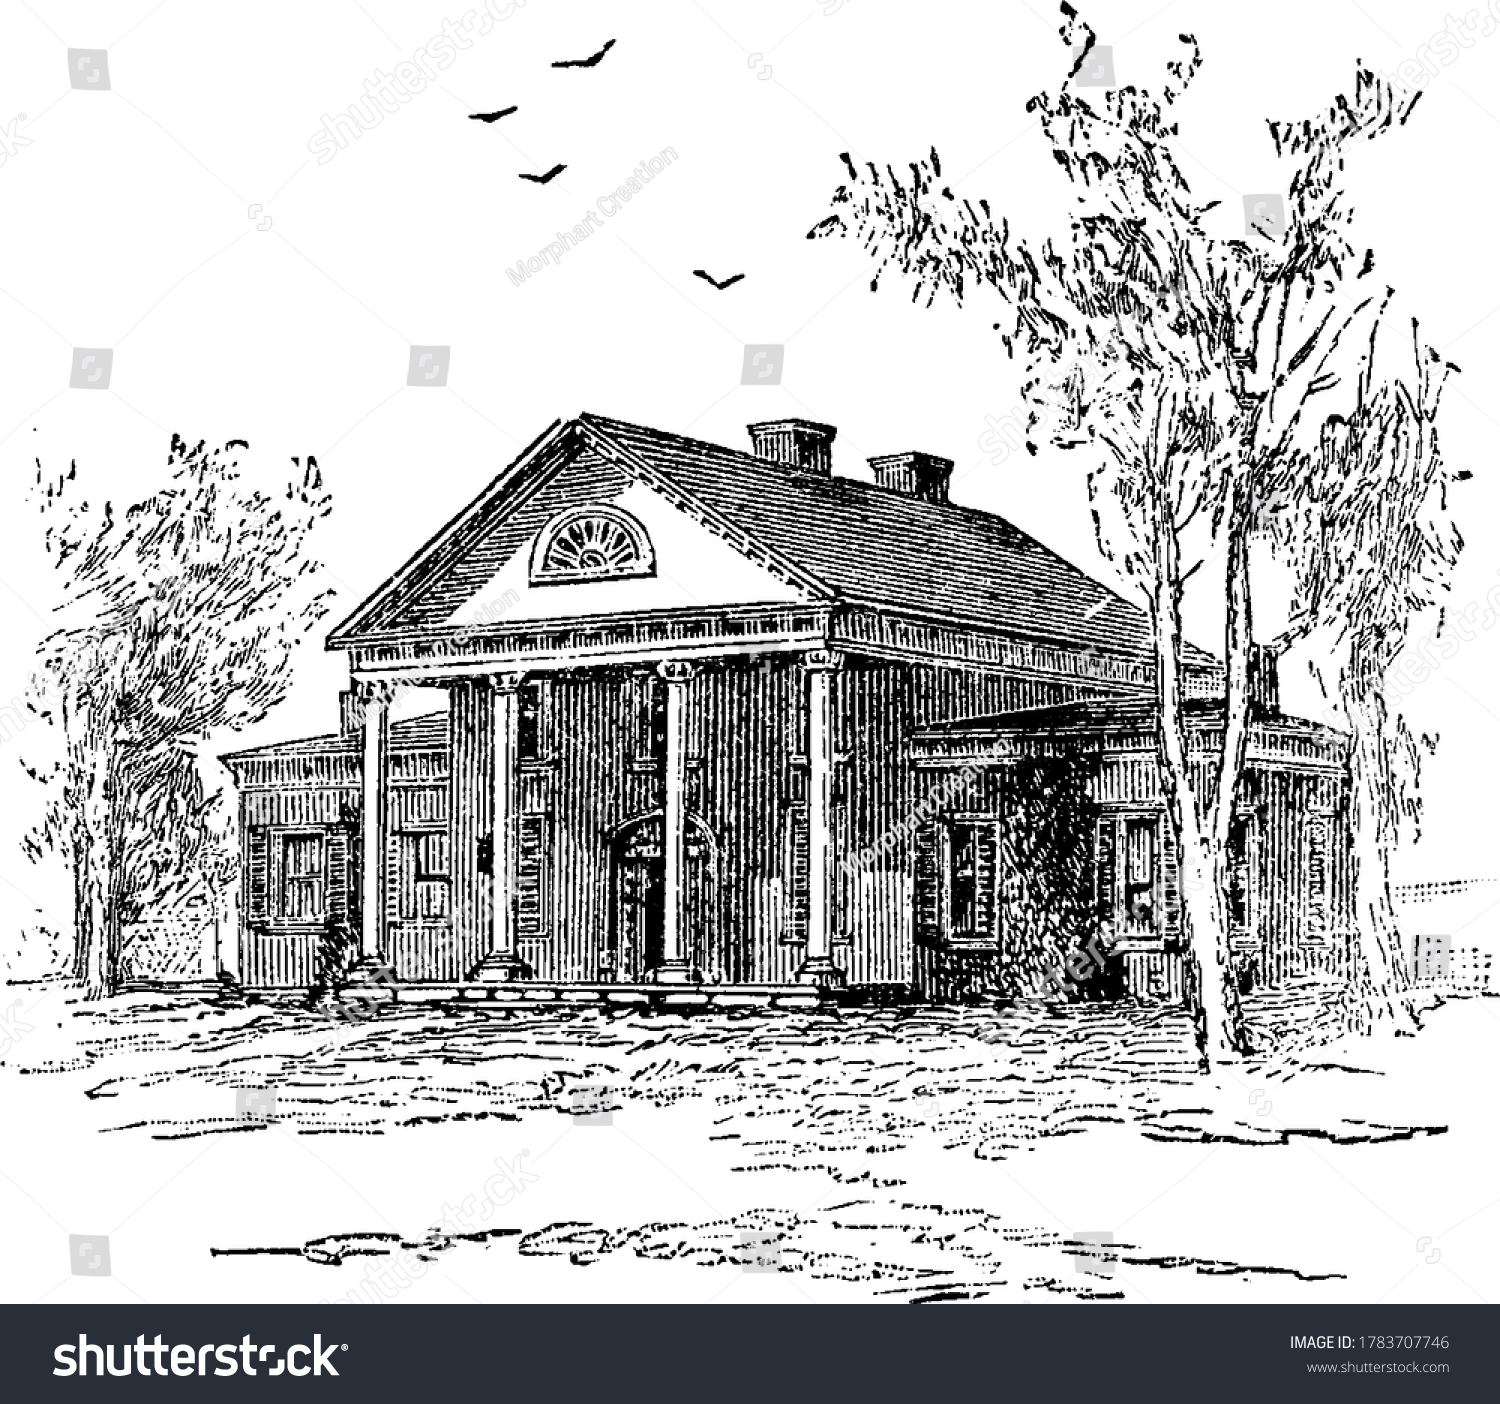 SVG of Figure showing John Lawrence Marye House during American civil war, Marye was a lawyer and Confederate soldier., vintage line drawing or engraving illustration.  svg